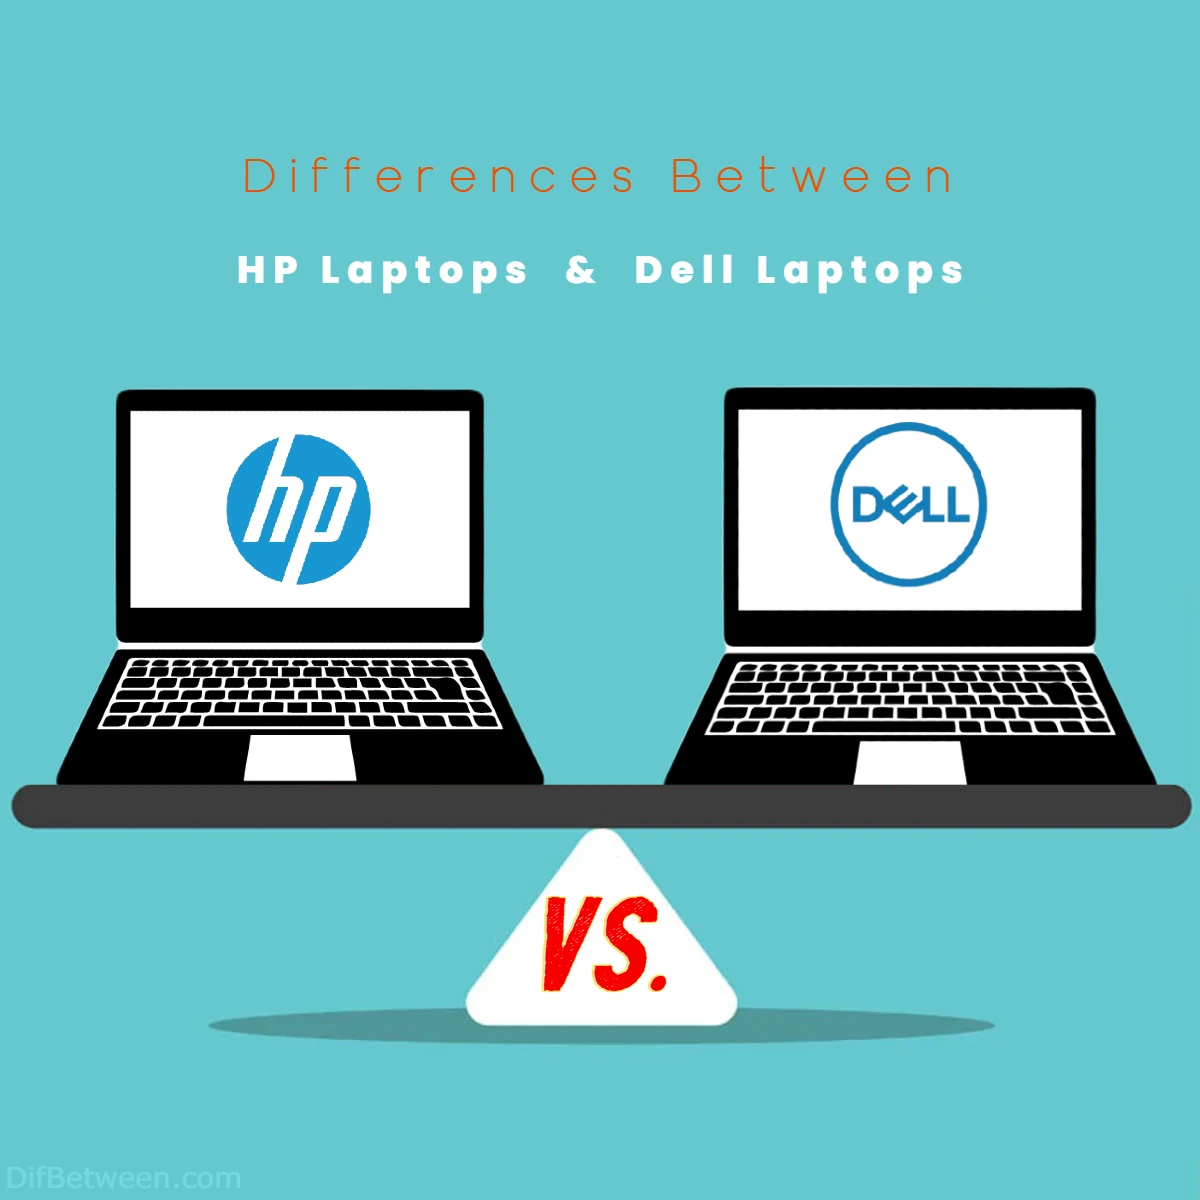 Differences Between HP vs Dell Laptops